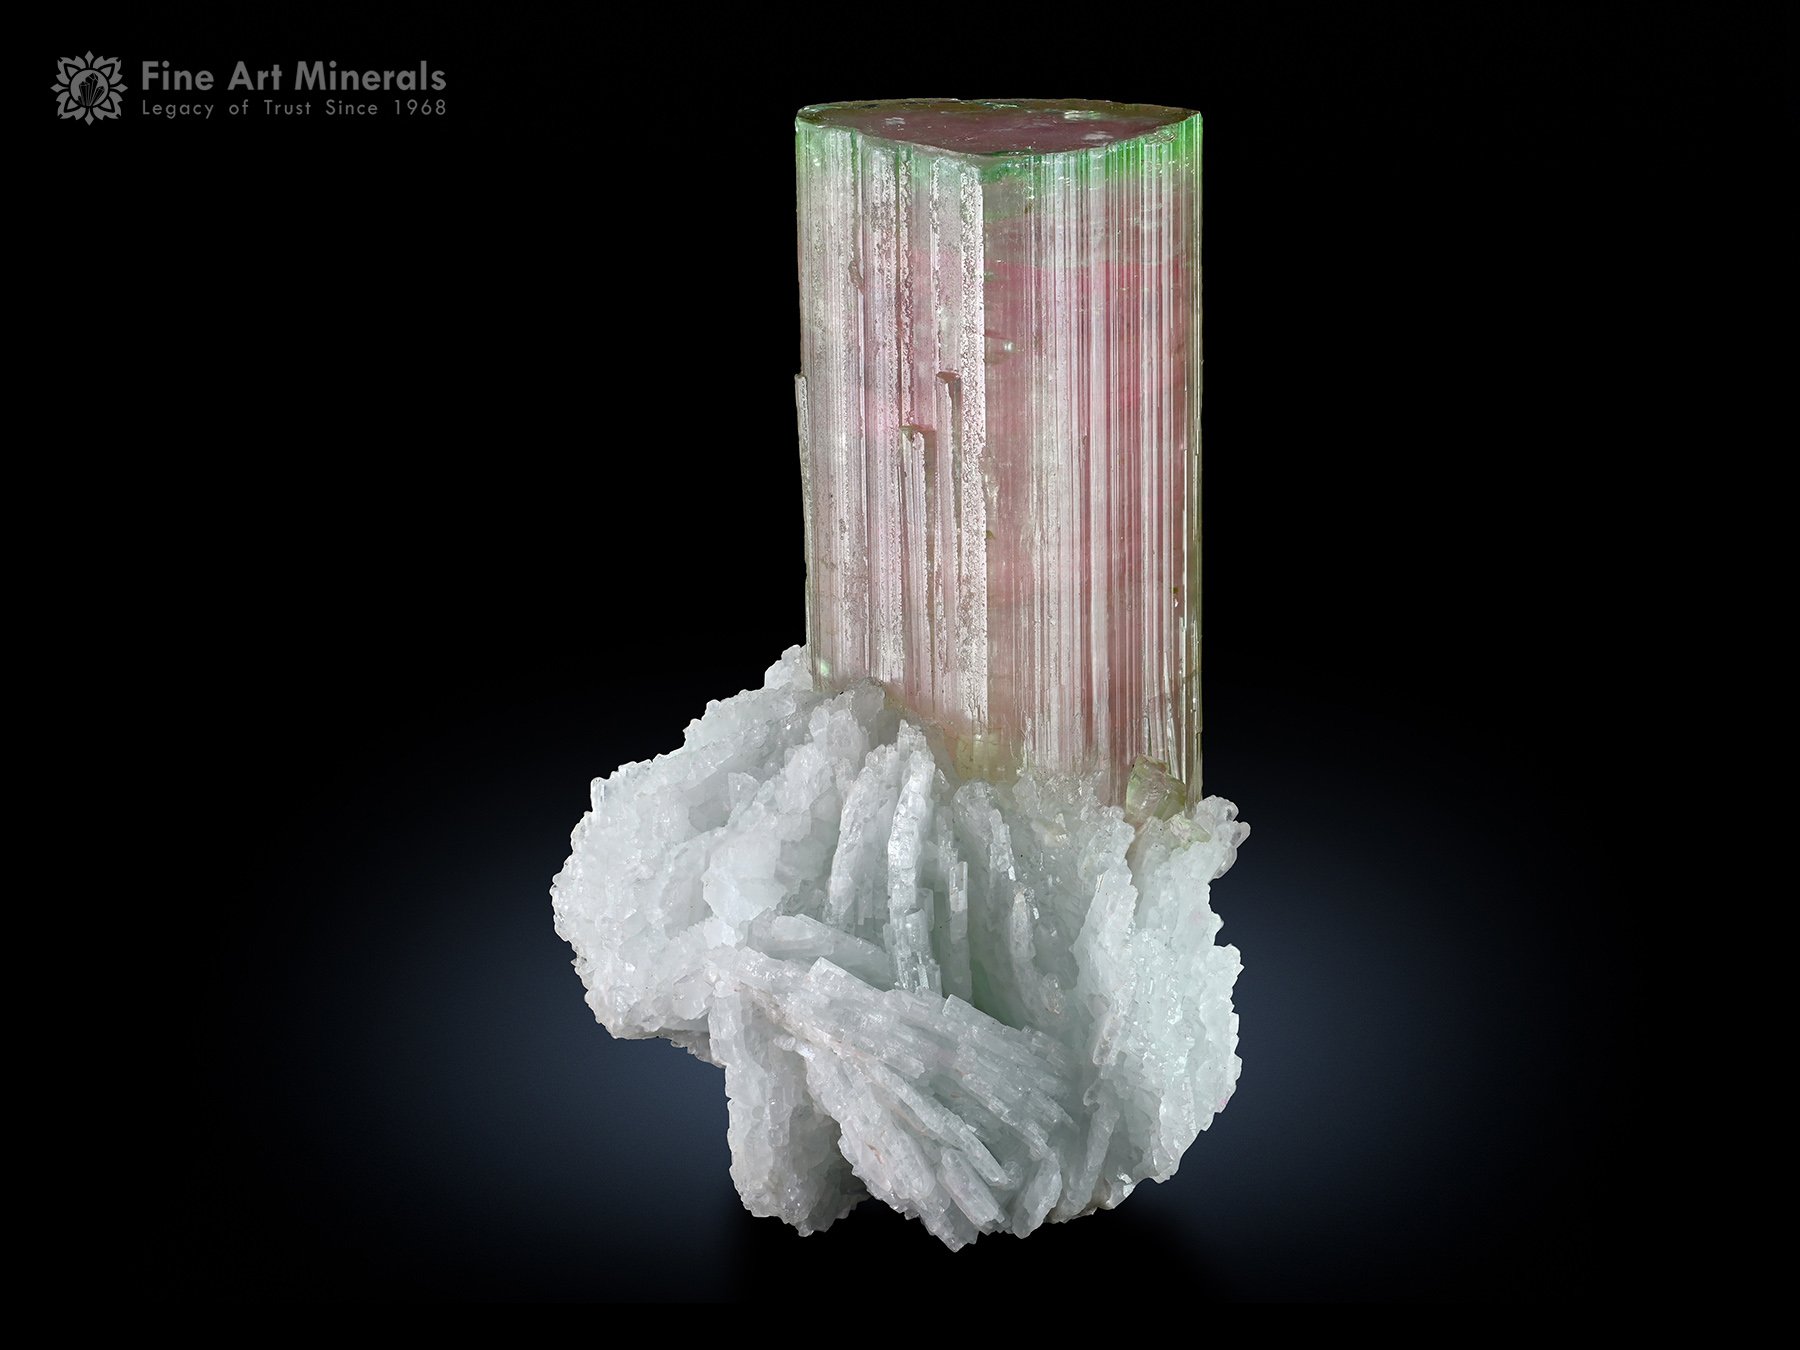 Tourmaline on Cleavelandite from Afghanistan